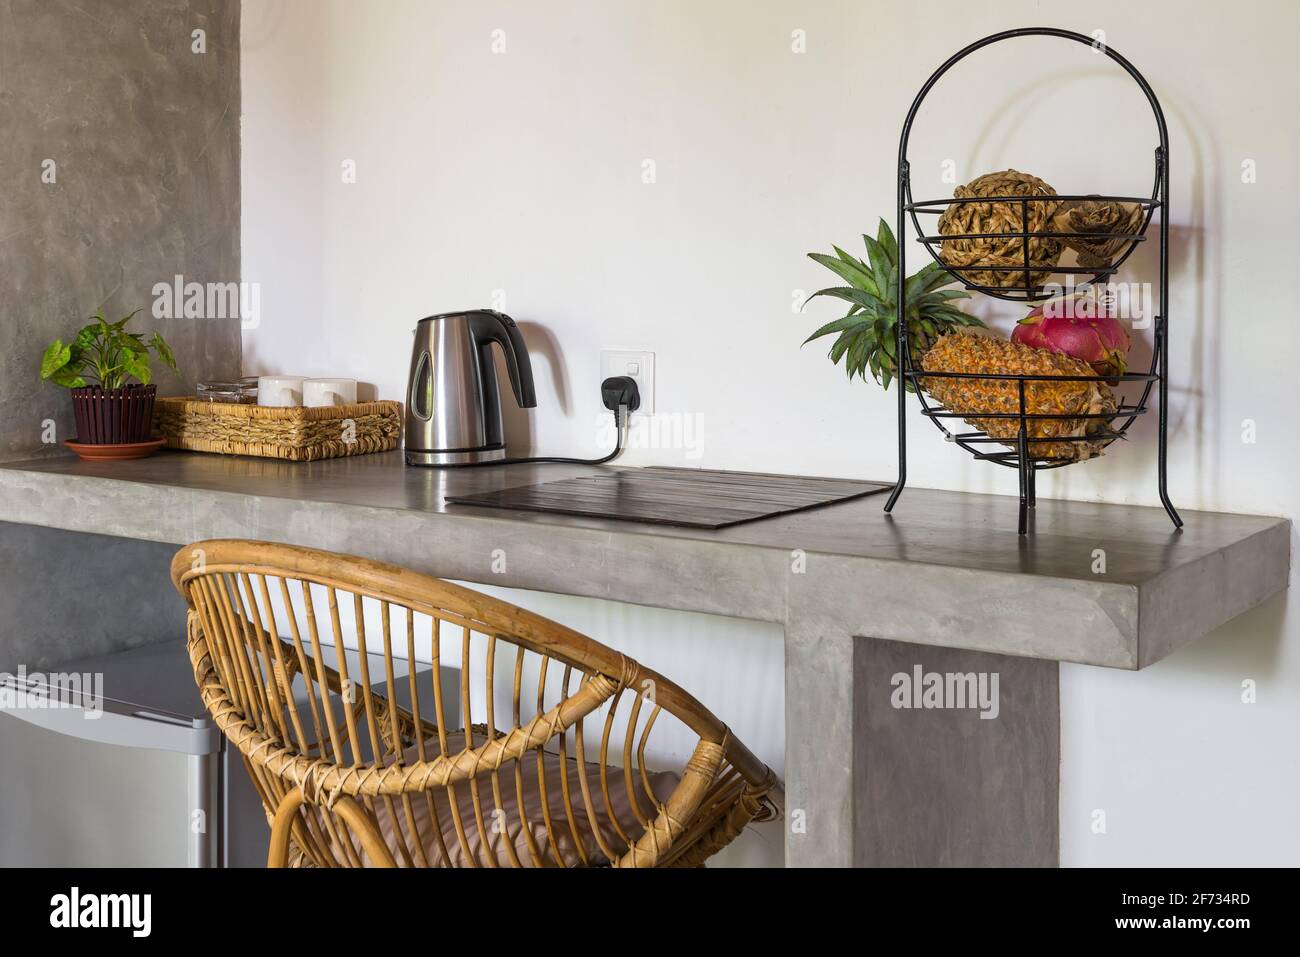 Interior of hotel or home room, Sri Lanka. Small kitchen table with dishes, pineapple, tropical fruits. Mini bar fridge and light wicker chair inside Stock Photo